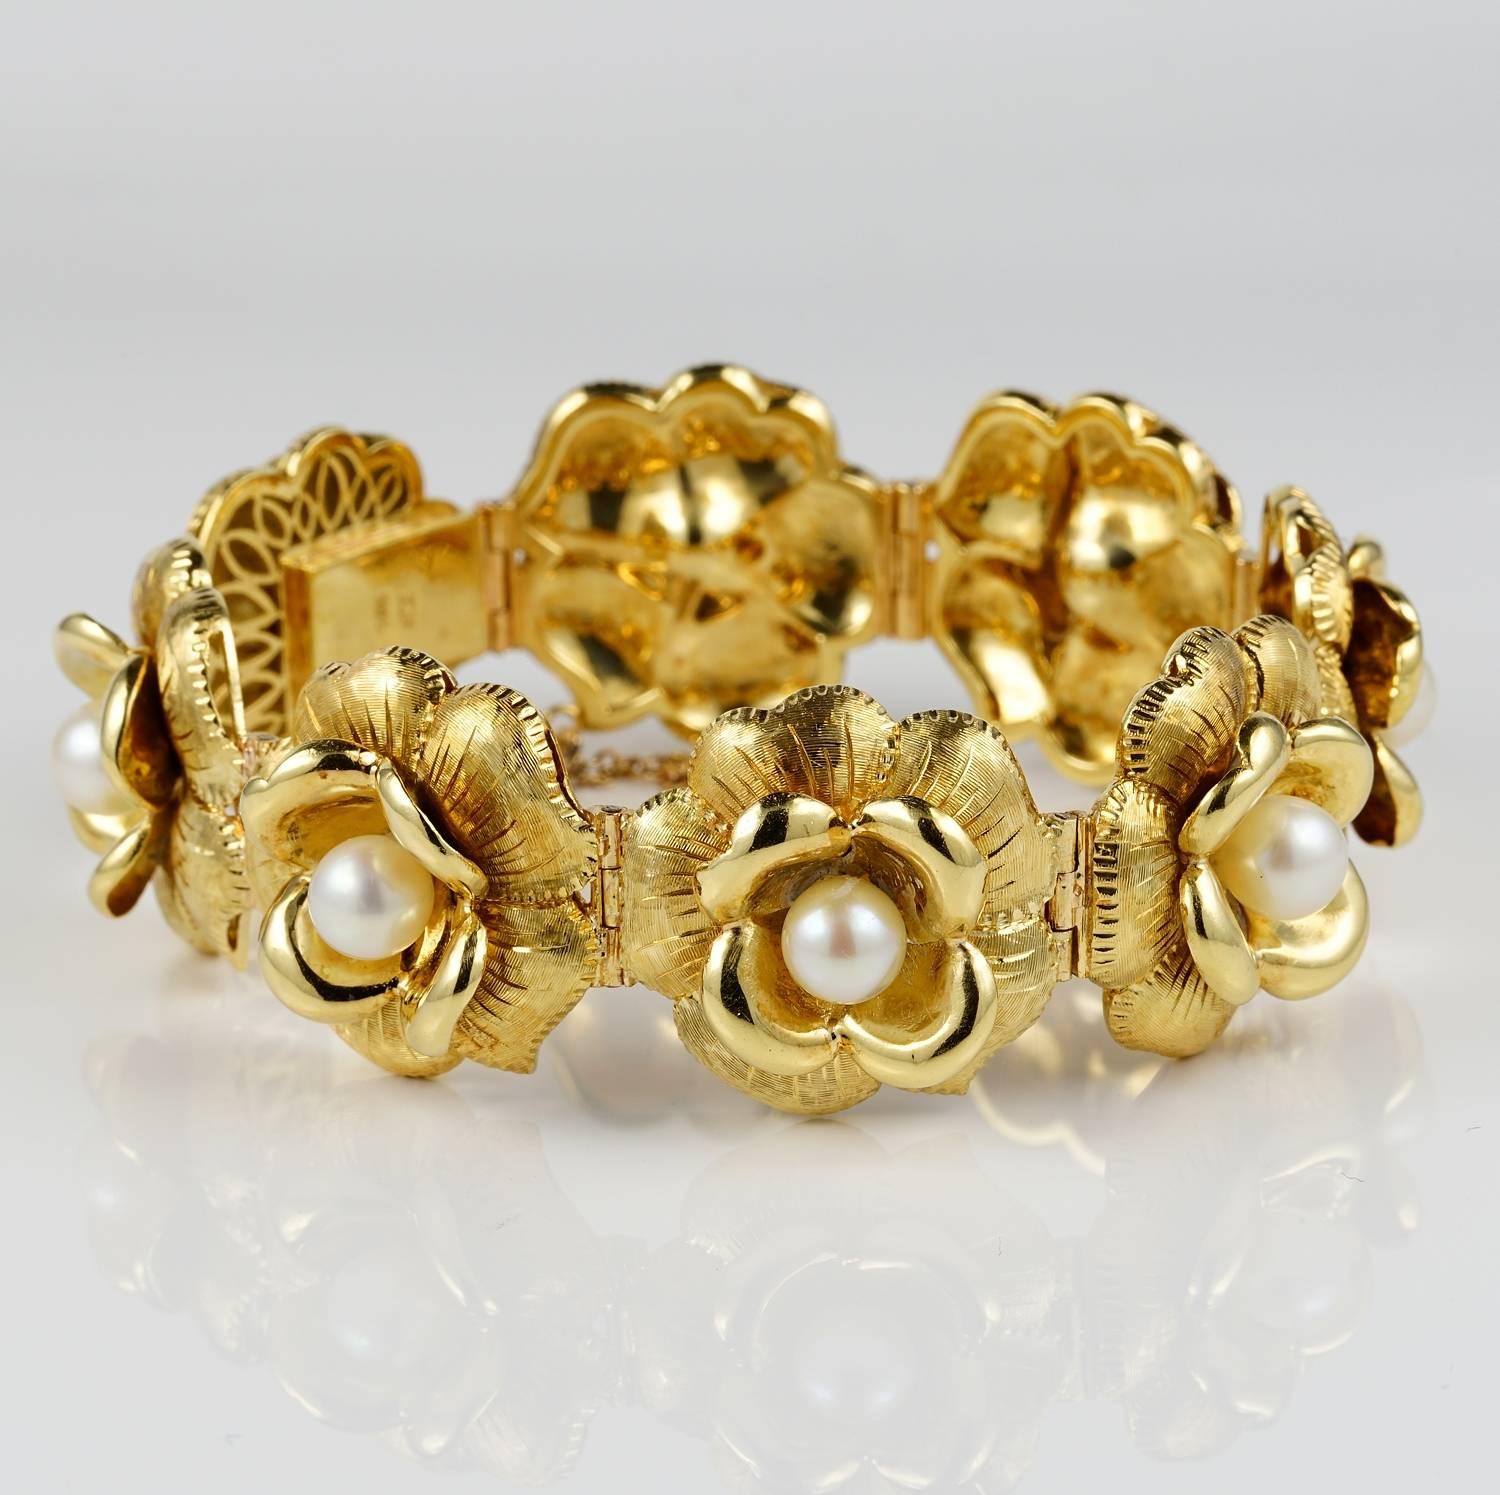 A very femminine and charmng 1940 ca 18 KT solid gold bracelet, bearing Italian post II World War marks
Exquisietly styled in an array of gold flowers, detailed with satin, carving and polished details, with lovely heart of pearls adding an extra